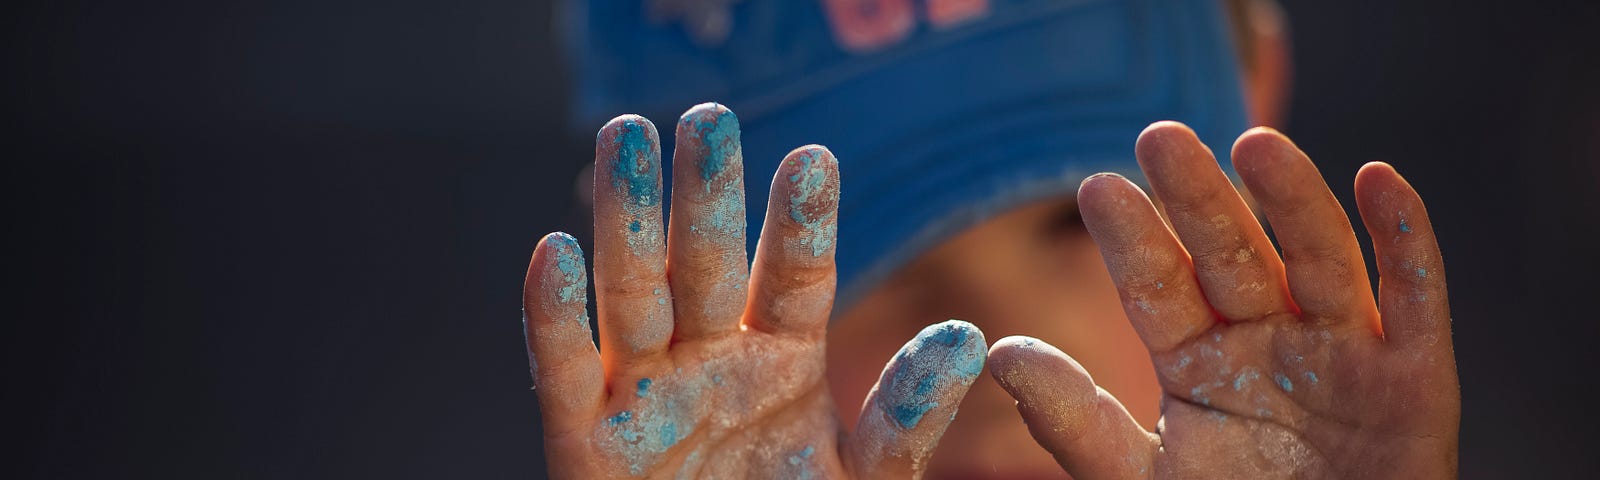 The messy, painted small hands of a young boy, pre-school aged, wearing a ball cap.